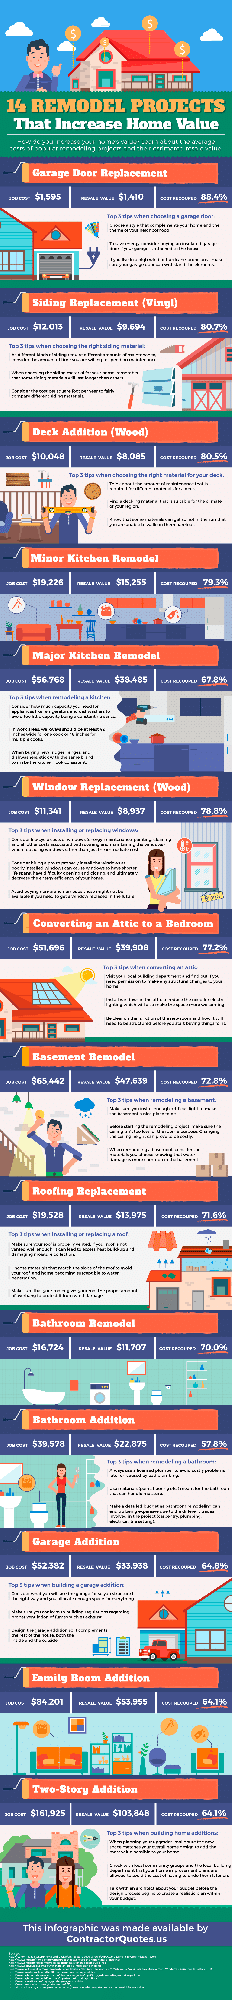 Remodelling-projects-that-increase-home-value-infographic 2